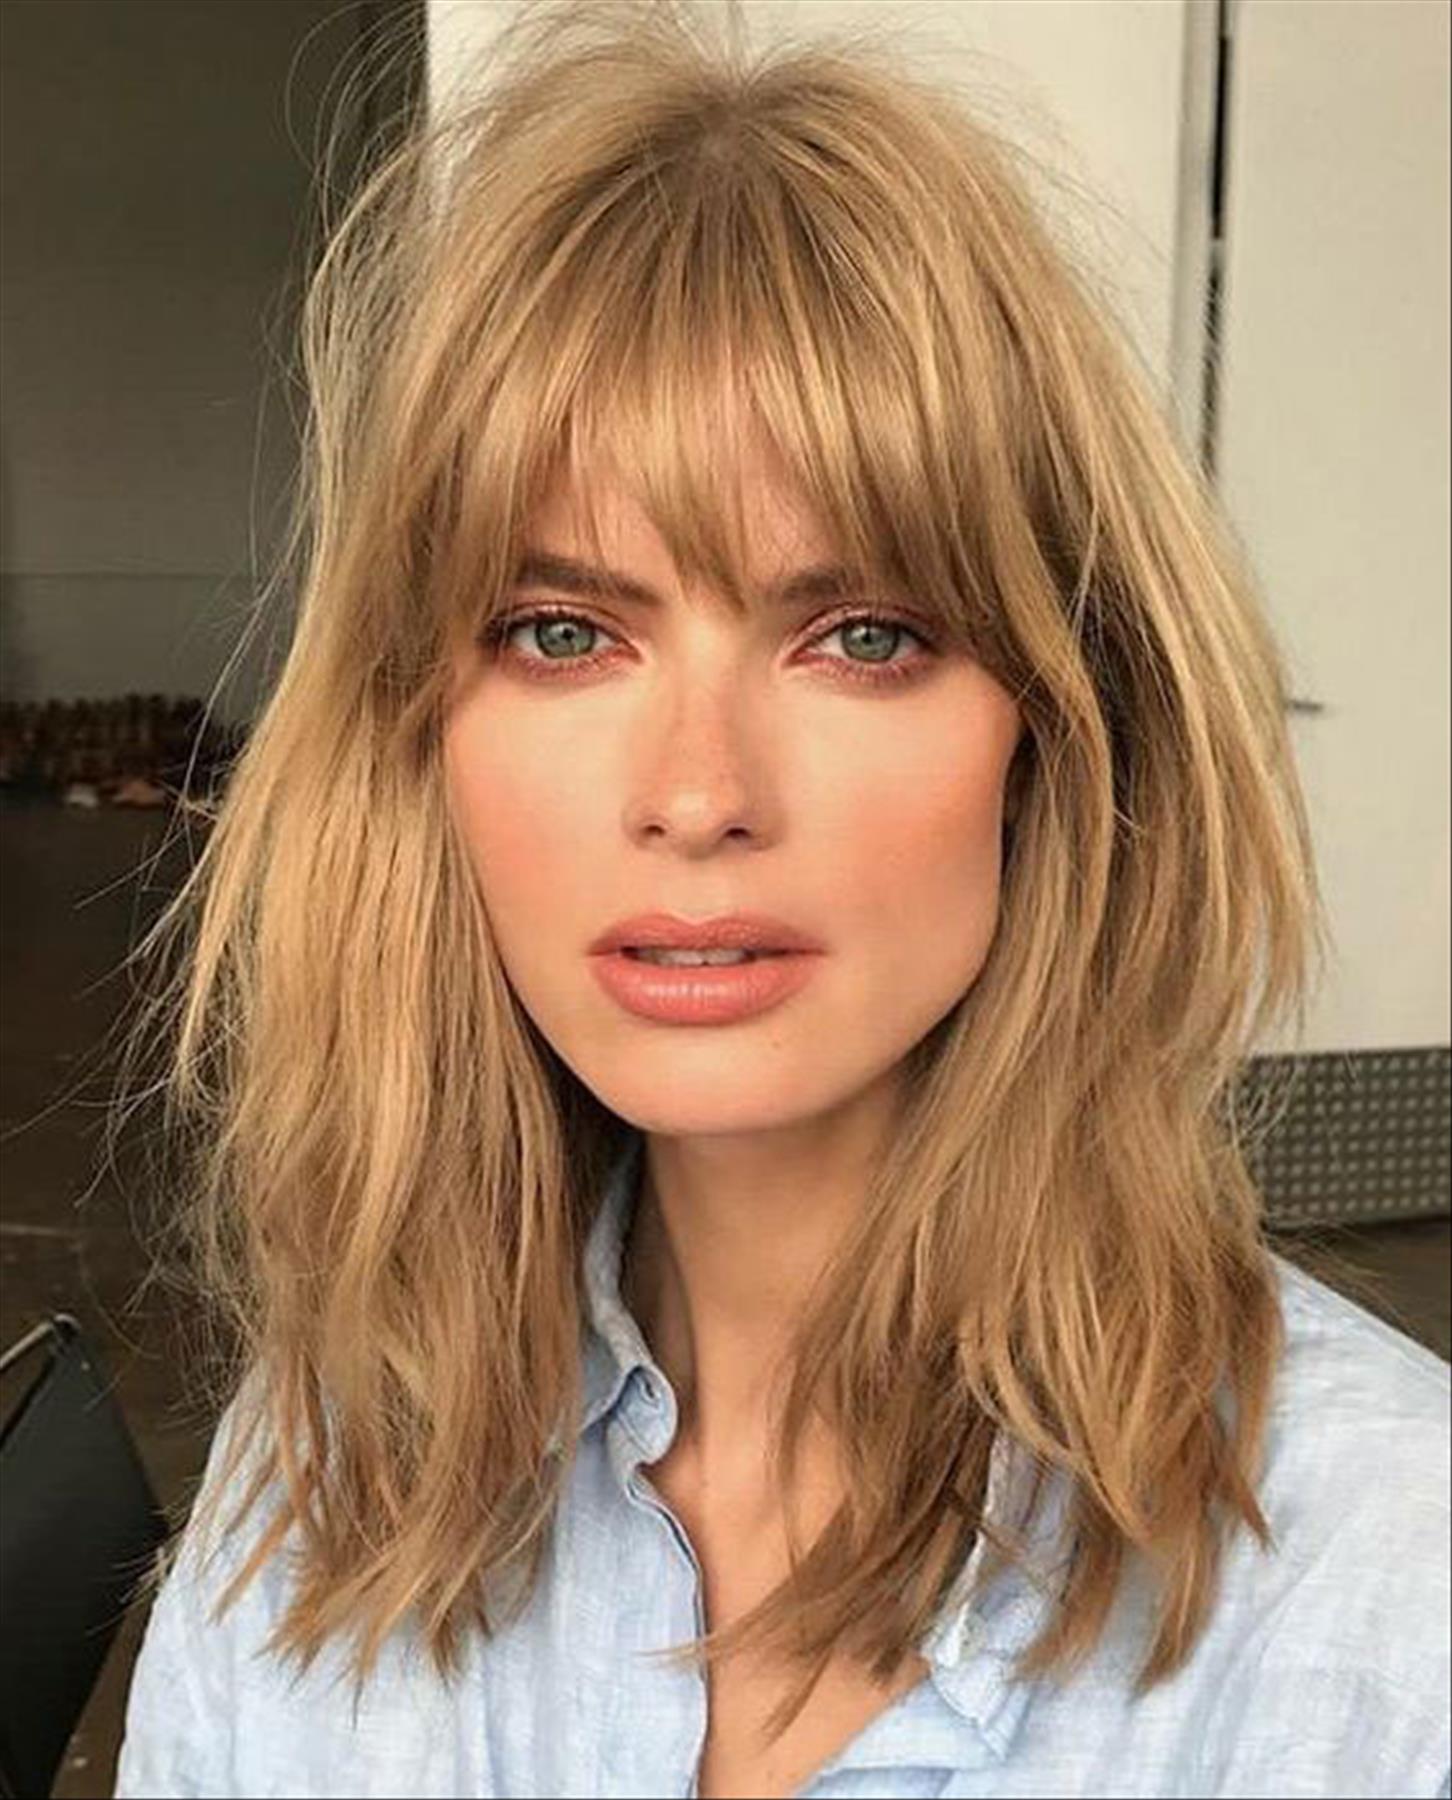 Hairstyle with bangs 2022 inspo curtain bangs and fringe bangs hair trends